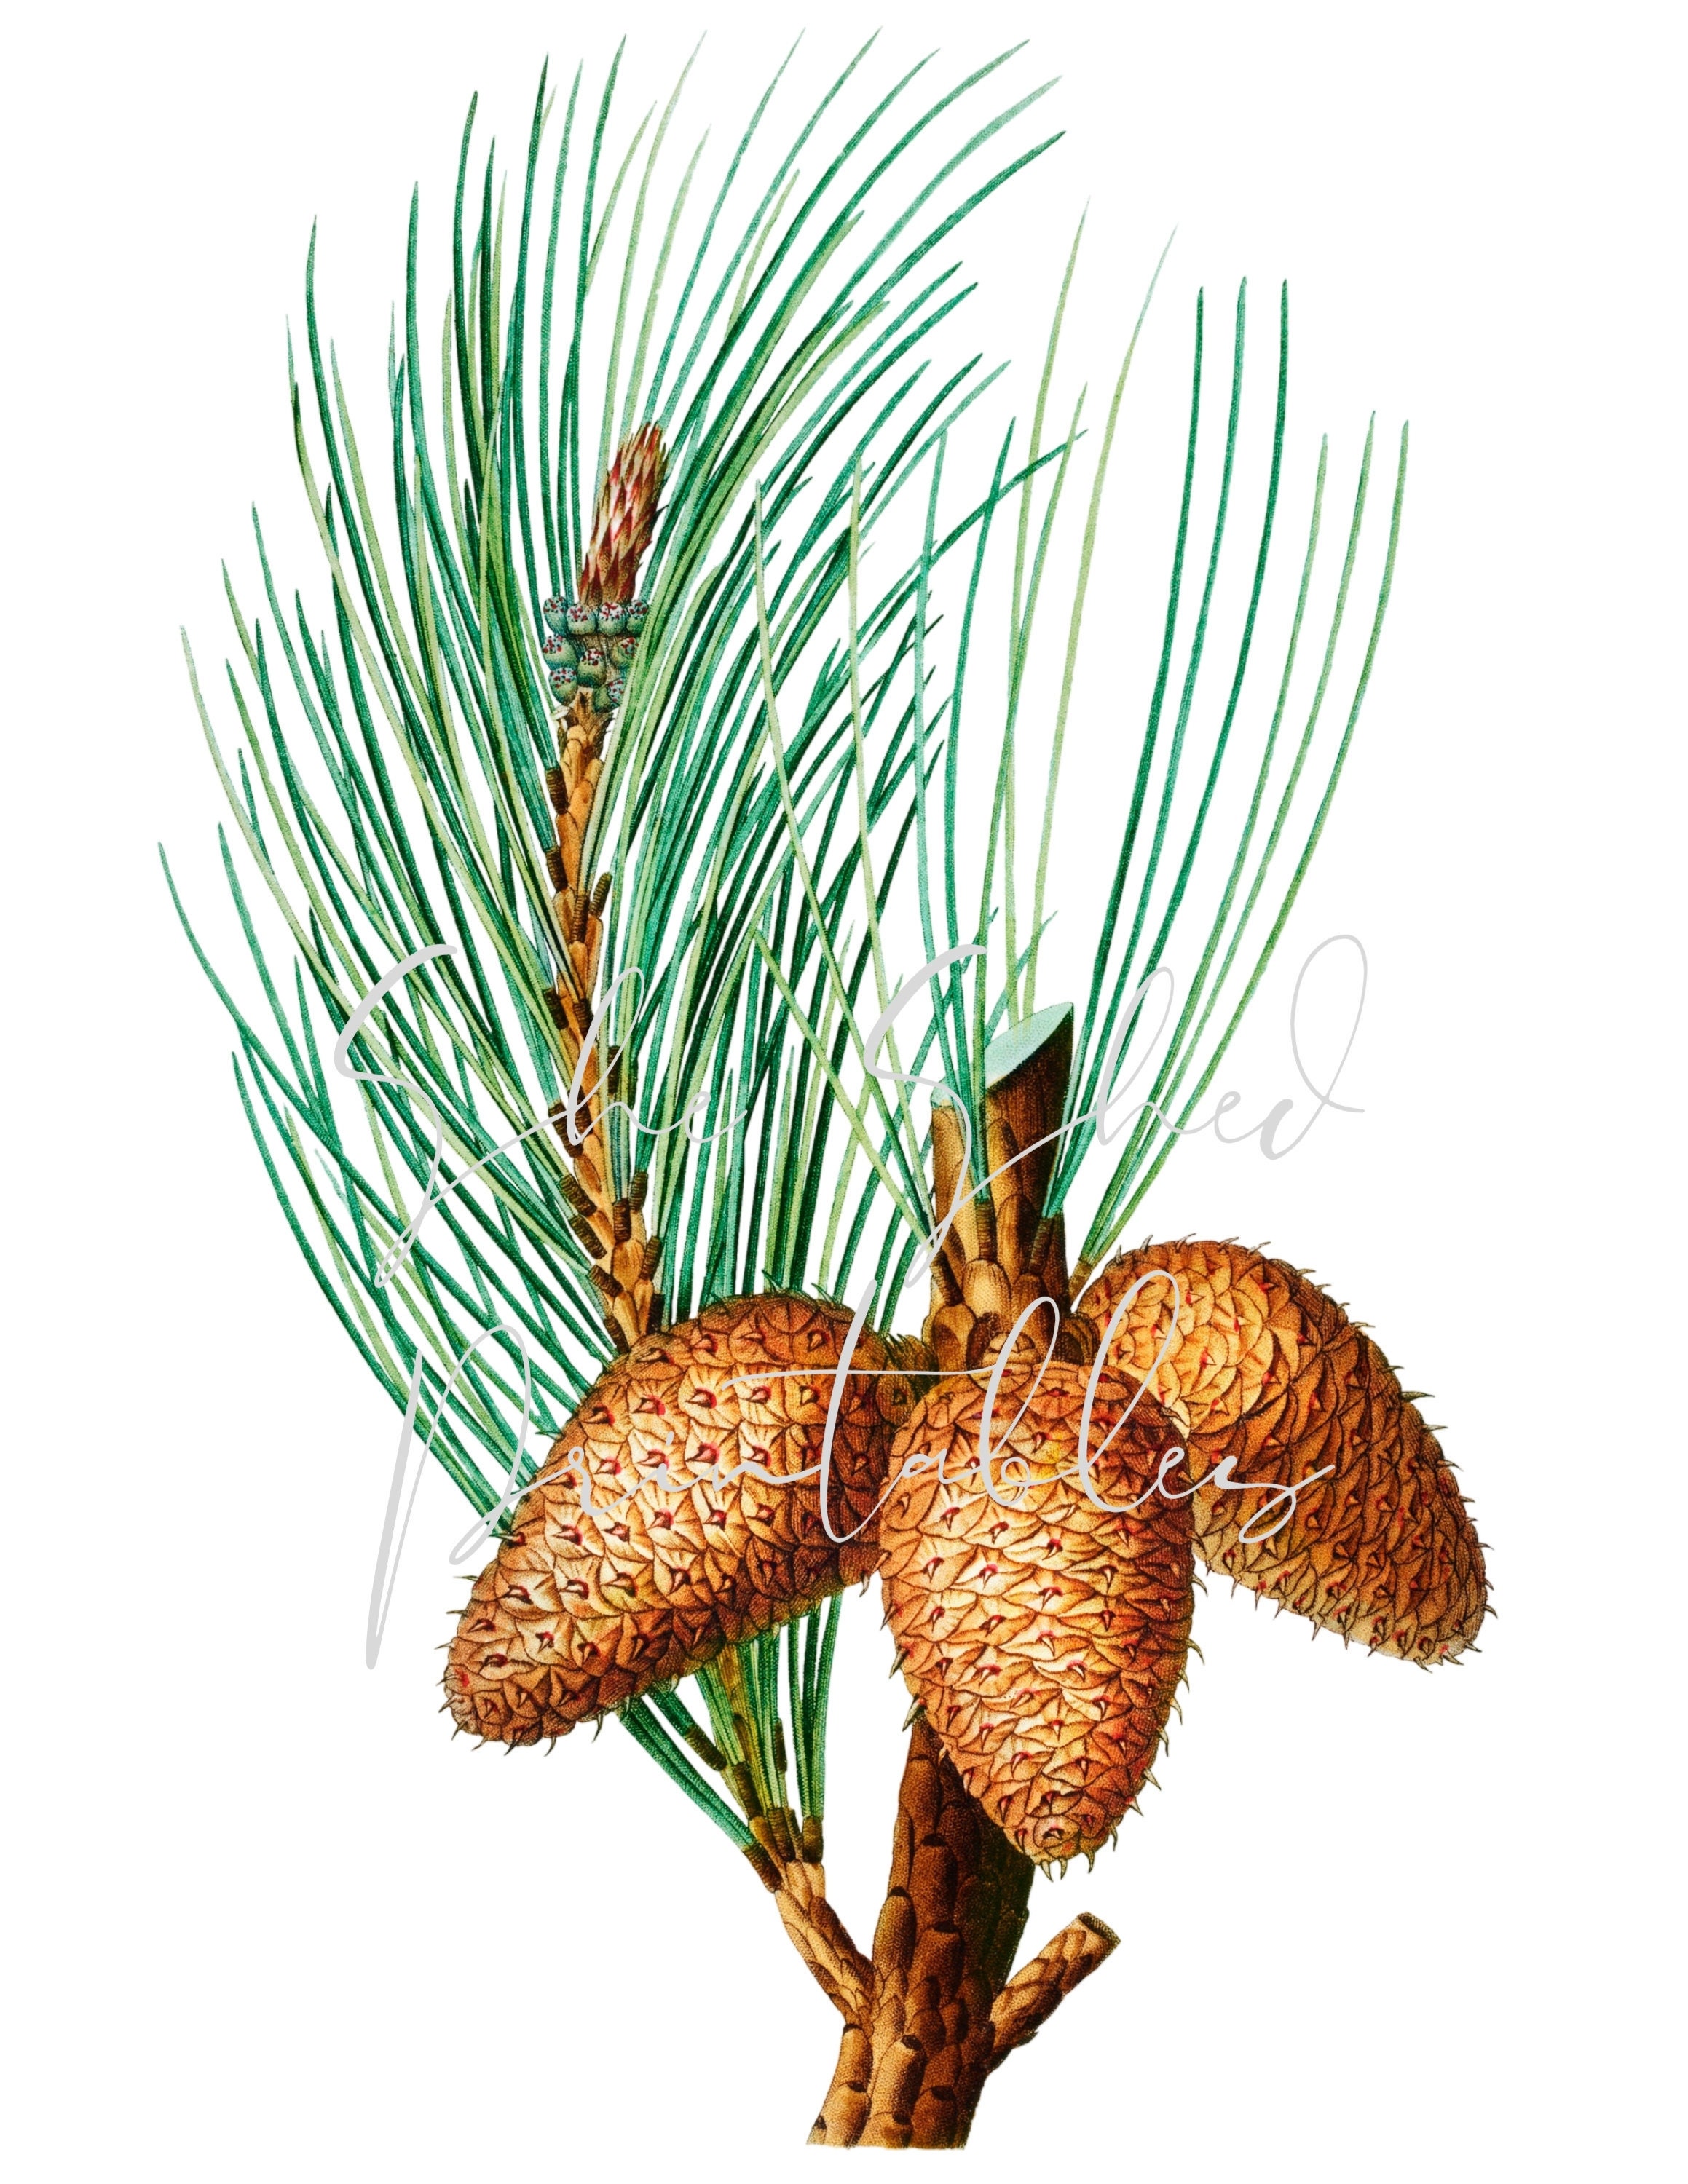 Pine Branch Clipart virginia Pine Botanical Illustration Digital Download  for Crafts, Wall Art, Collages, Transfers, Scrapbooking 